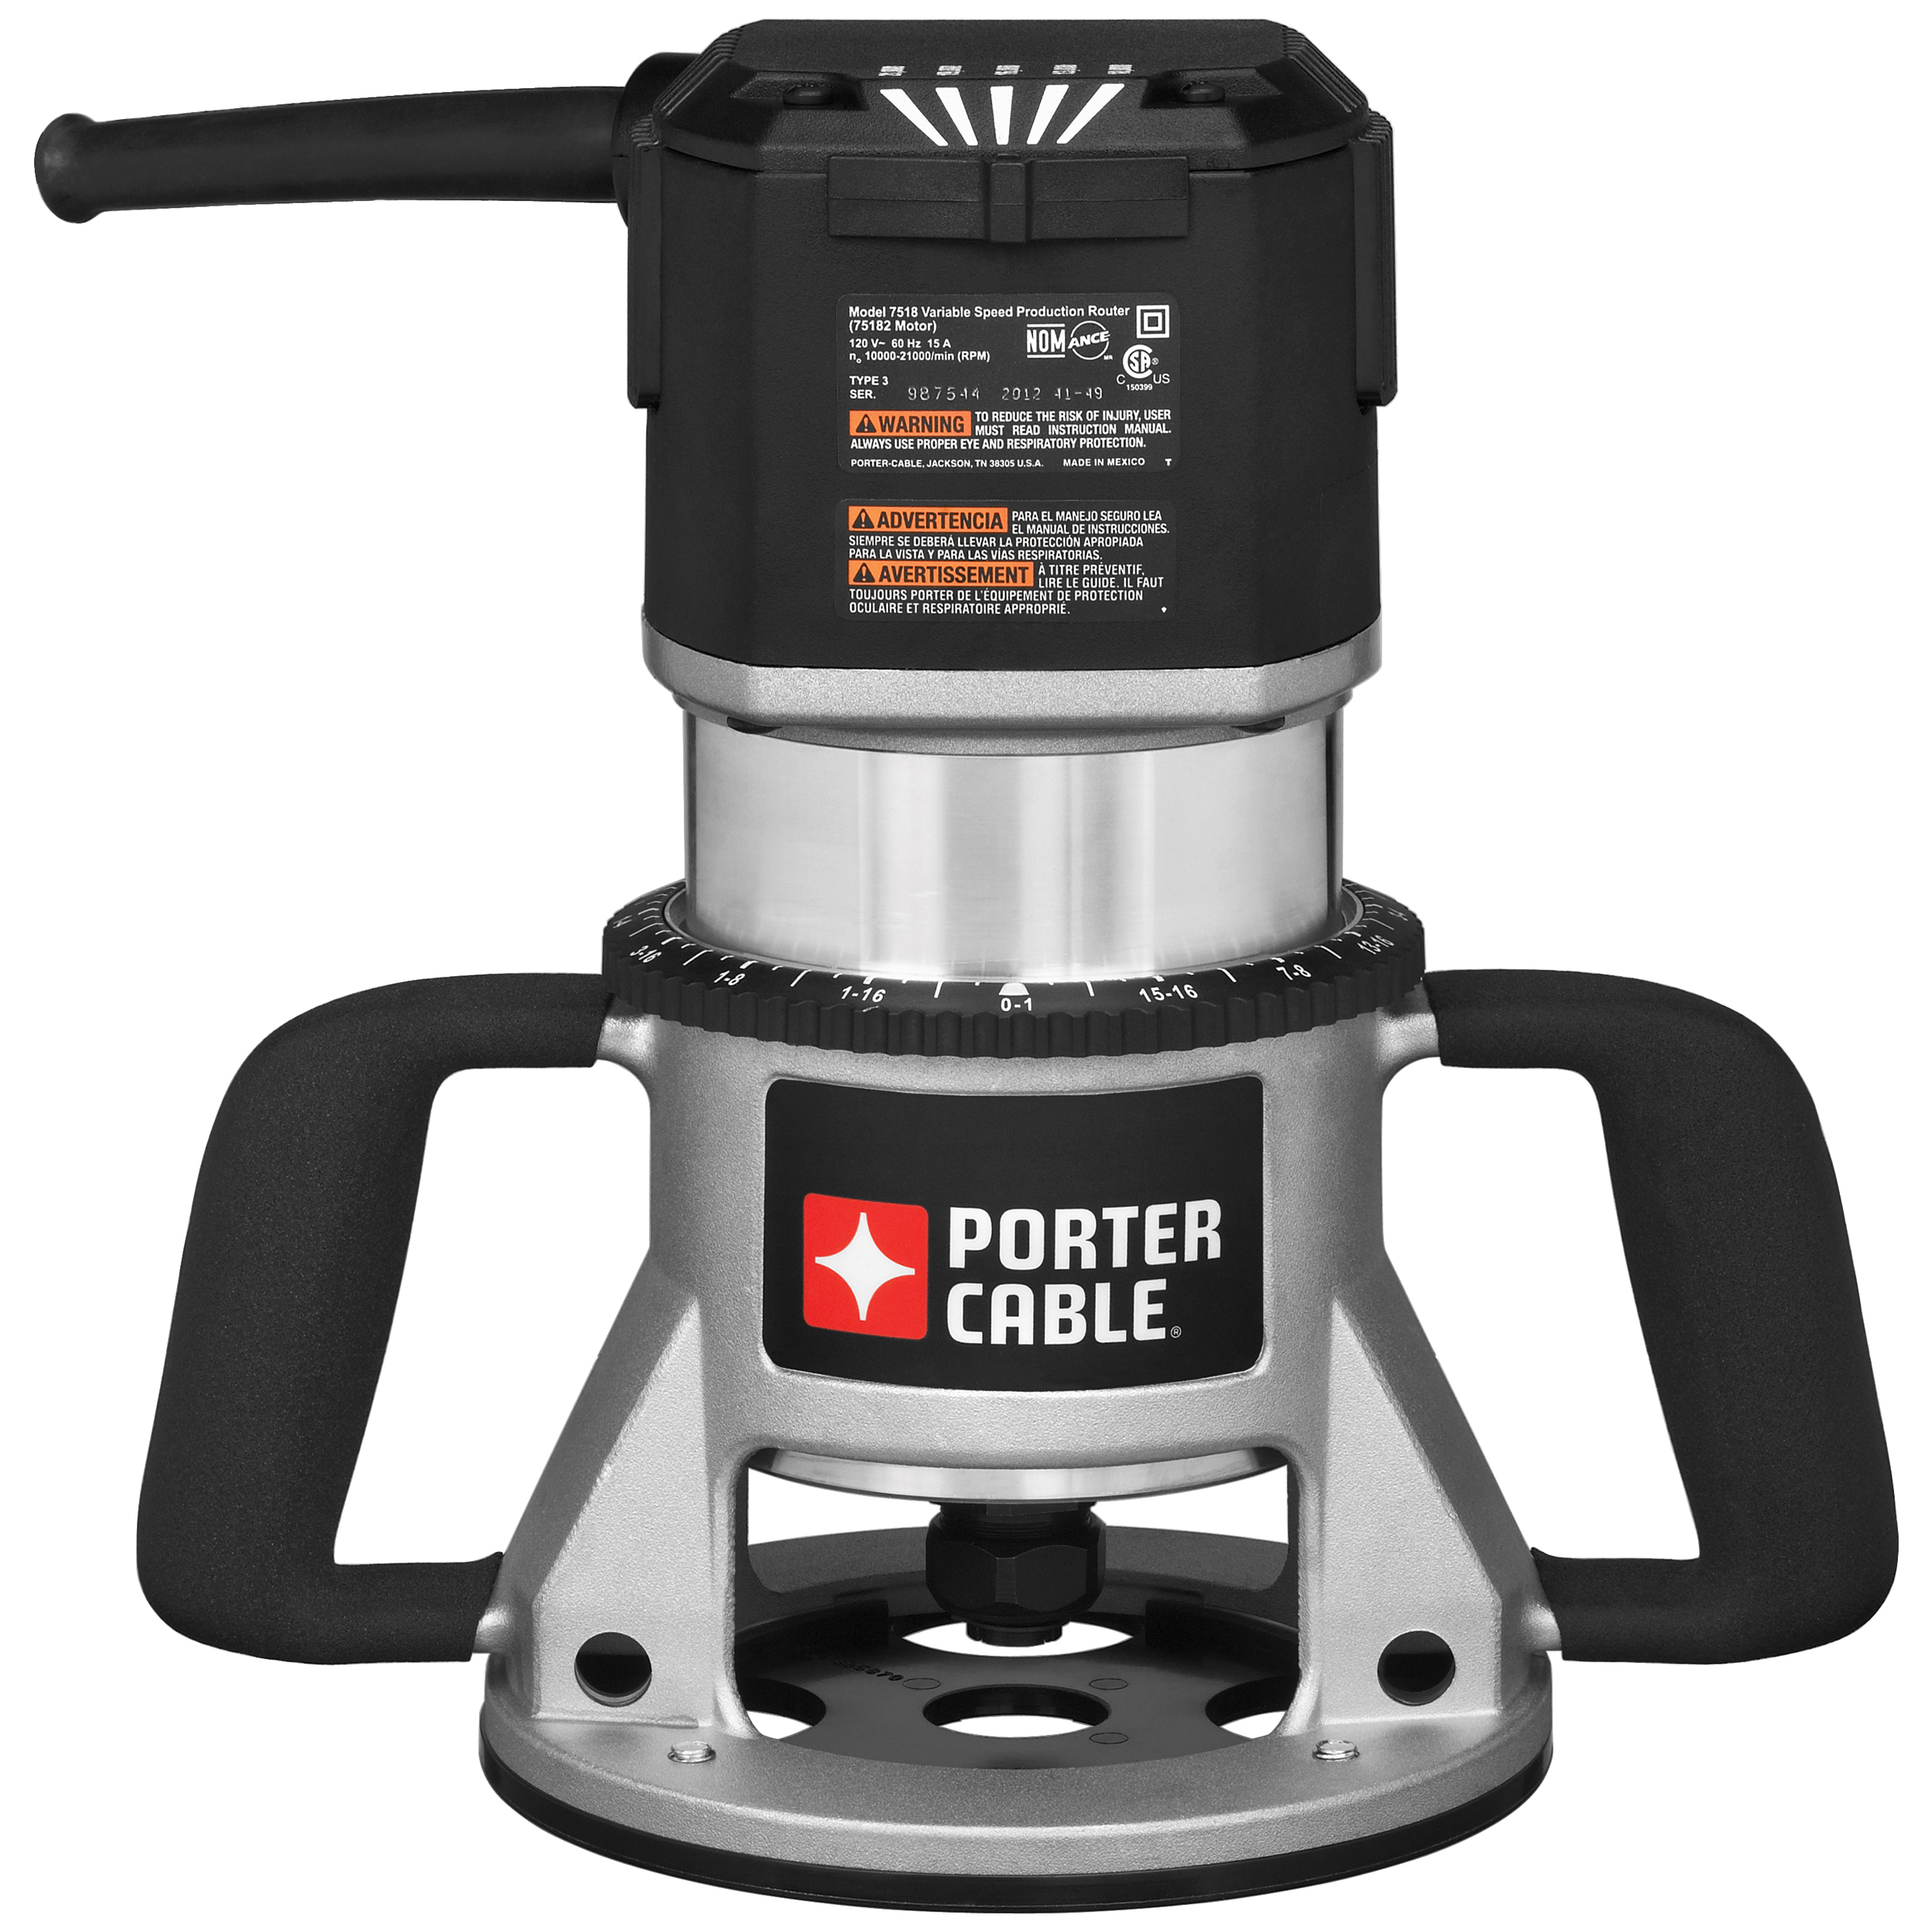 Porter-cable Model 7518 3-1/4 Hp Router